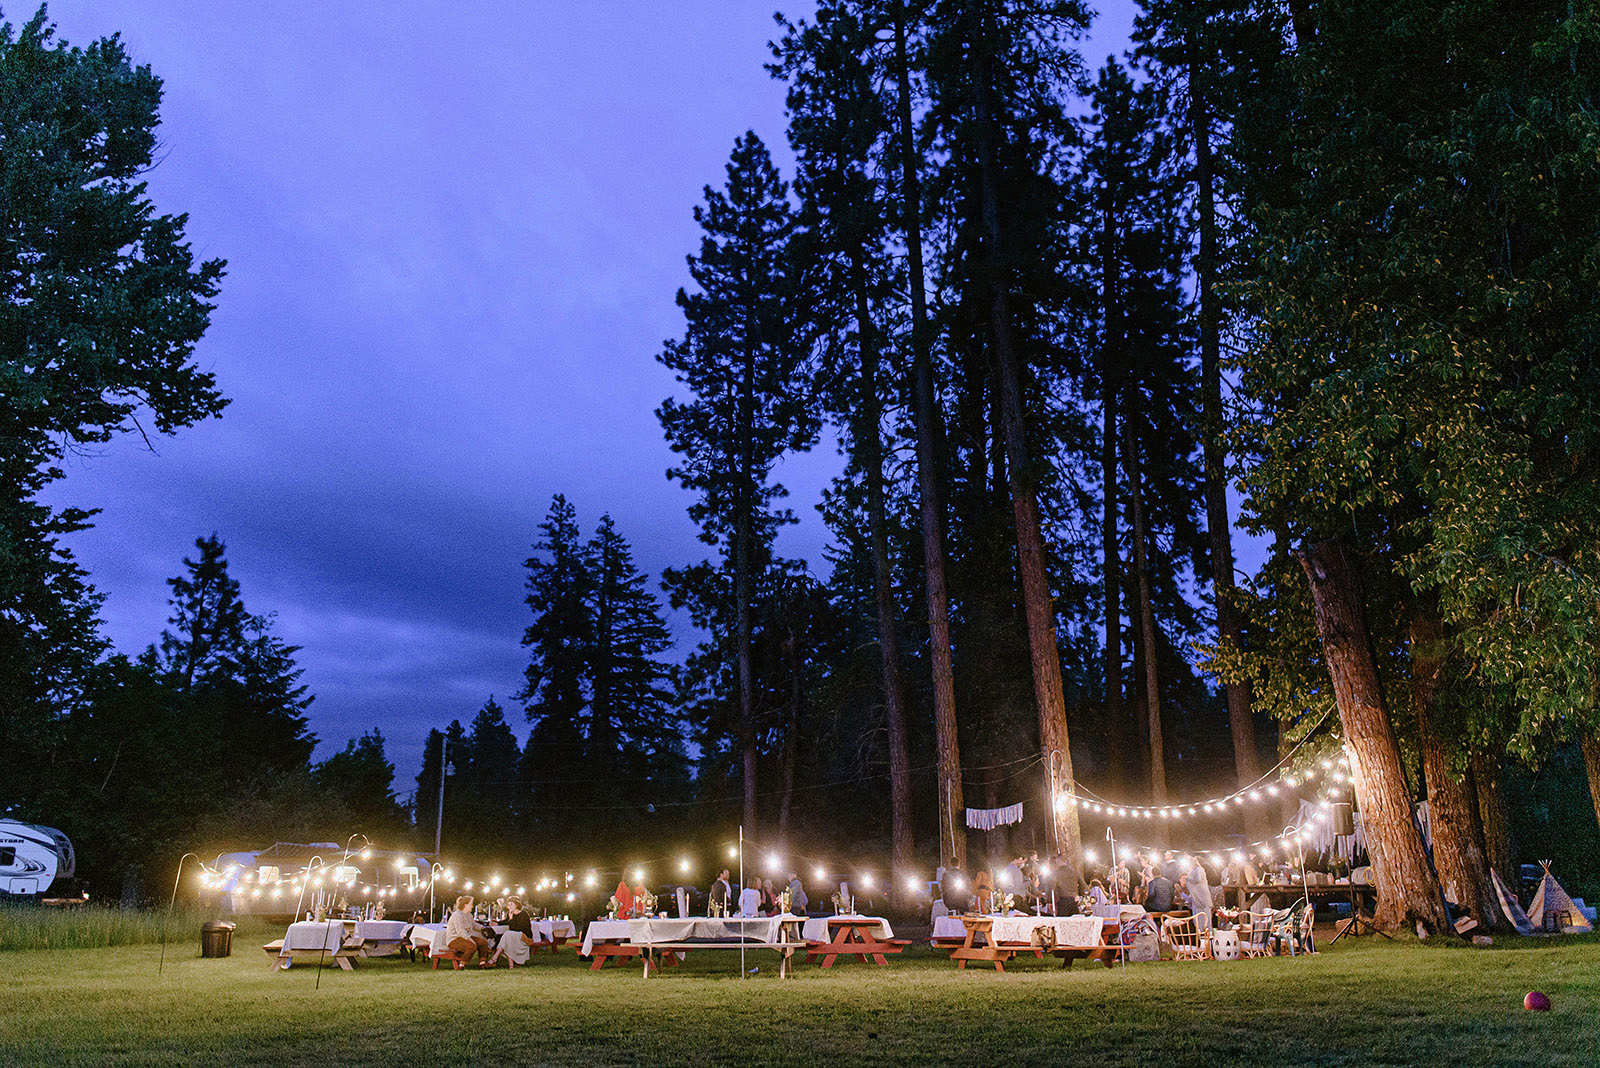 String lights surrounding a late night reception at Hollenbeck Park - Trout Lake Wedding, WA